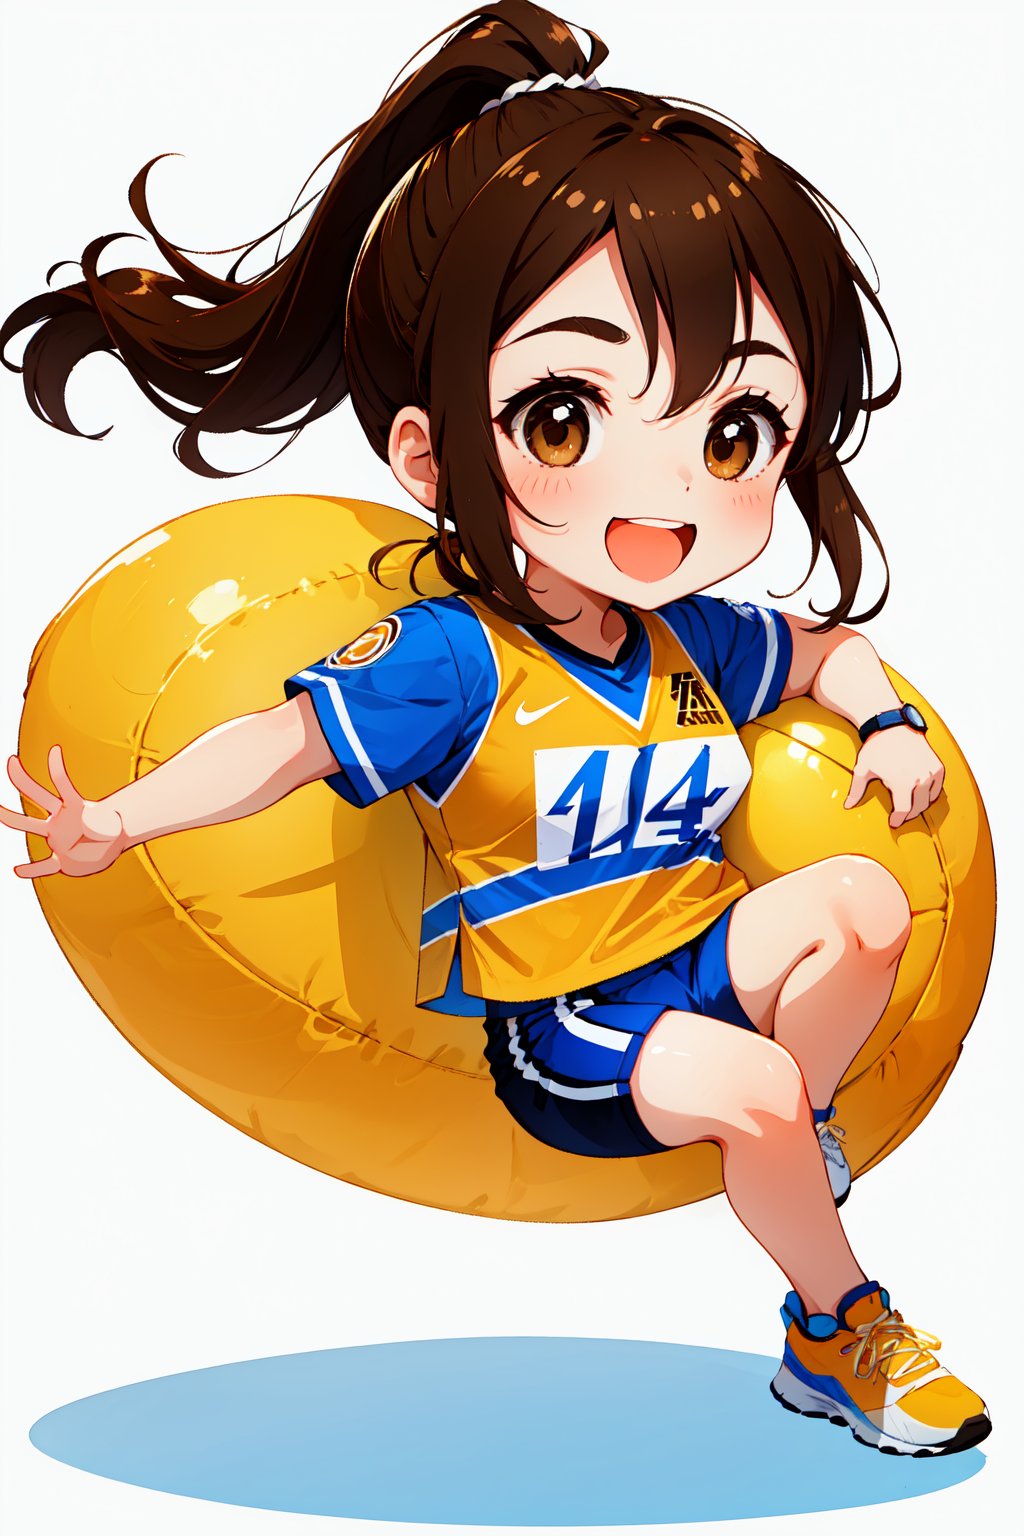 Cute girl, White background, full body image, athlete girl, ponytail hairstyle, brown hair, she's happy, dynamic pose. Chibi